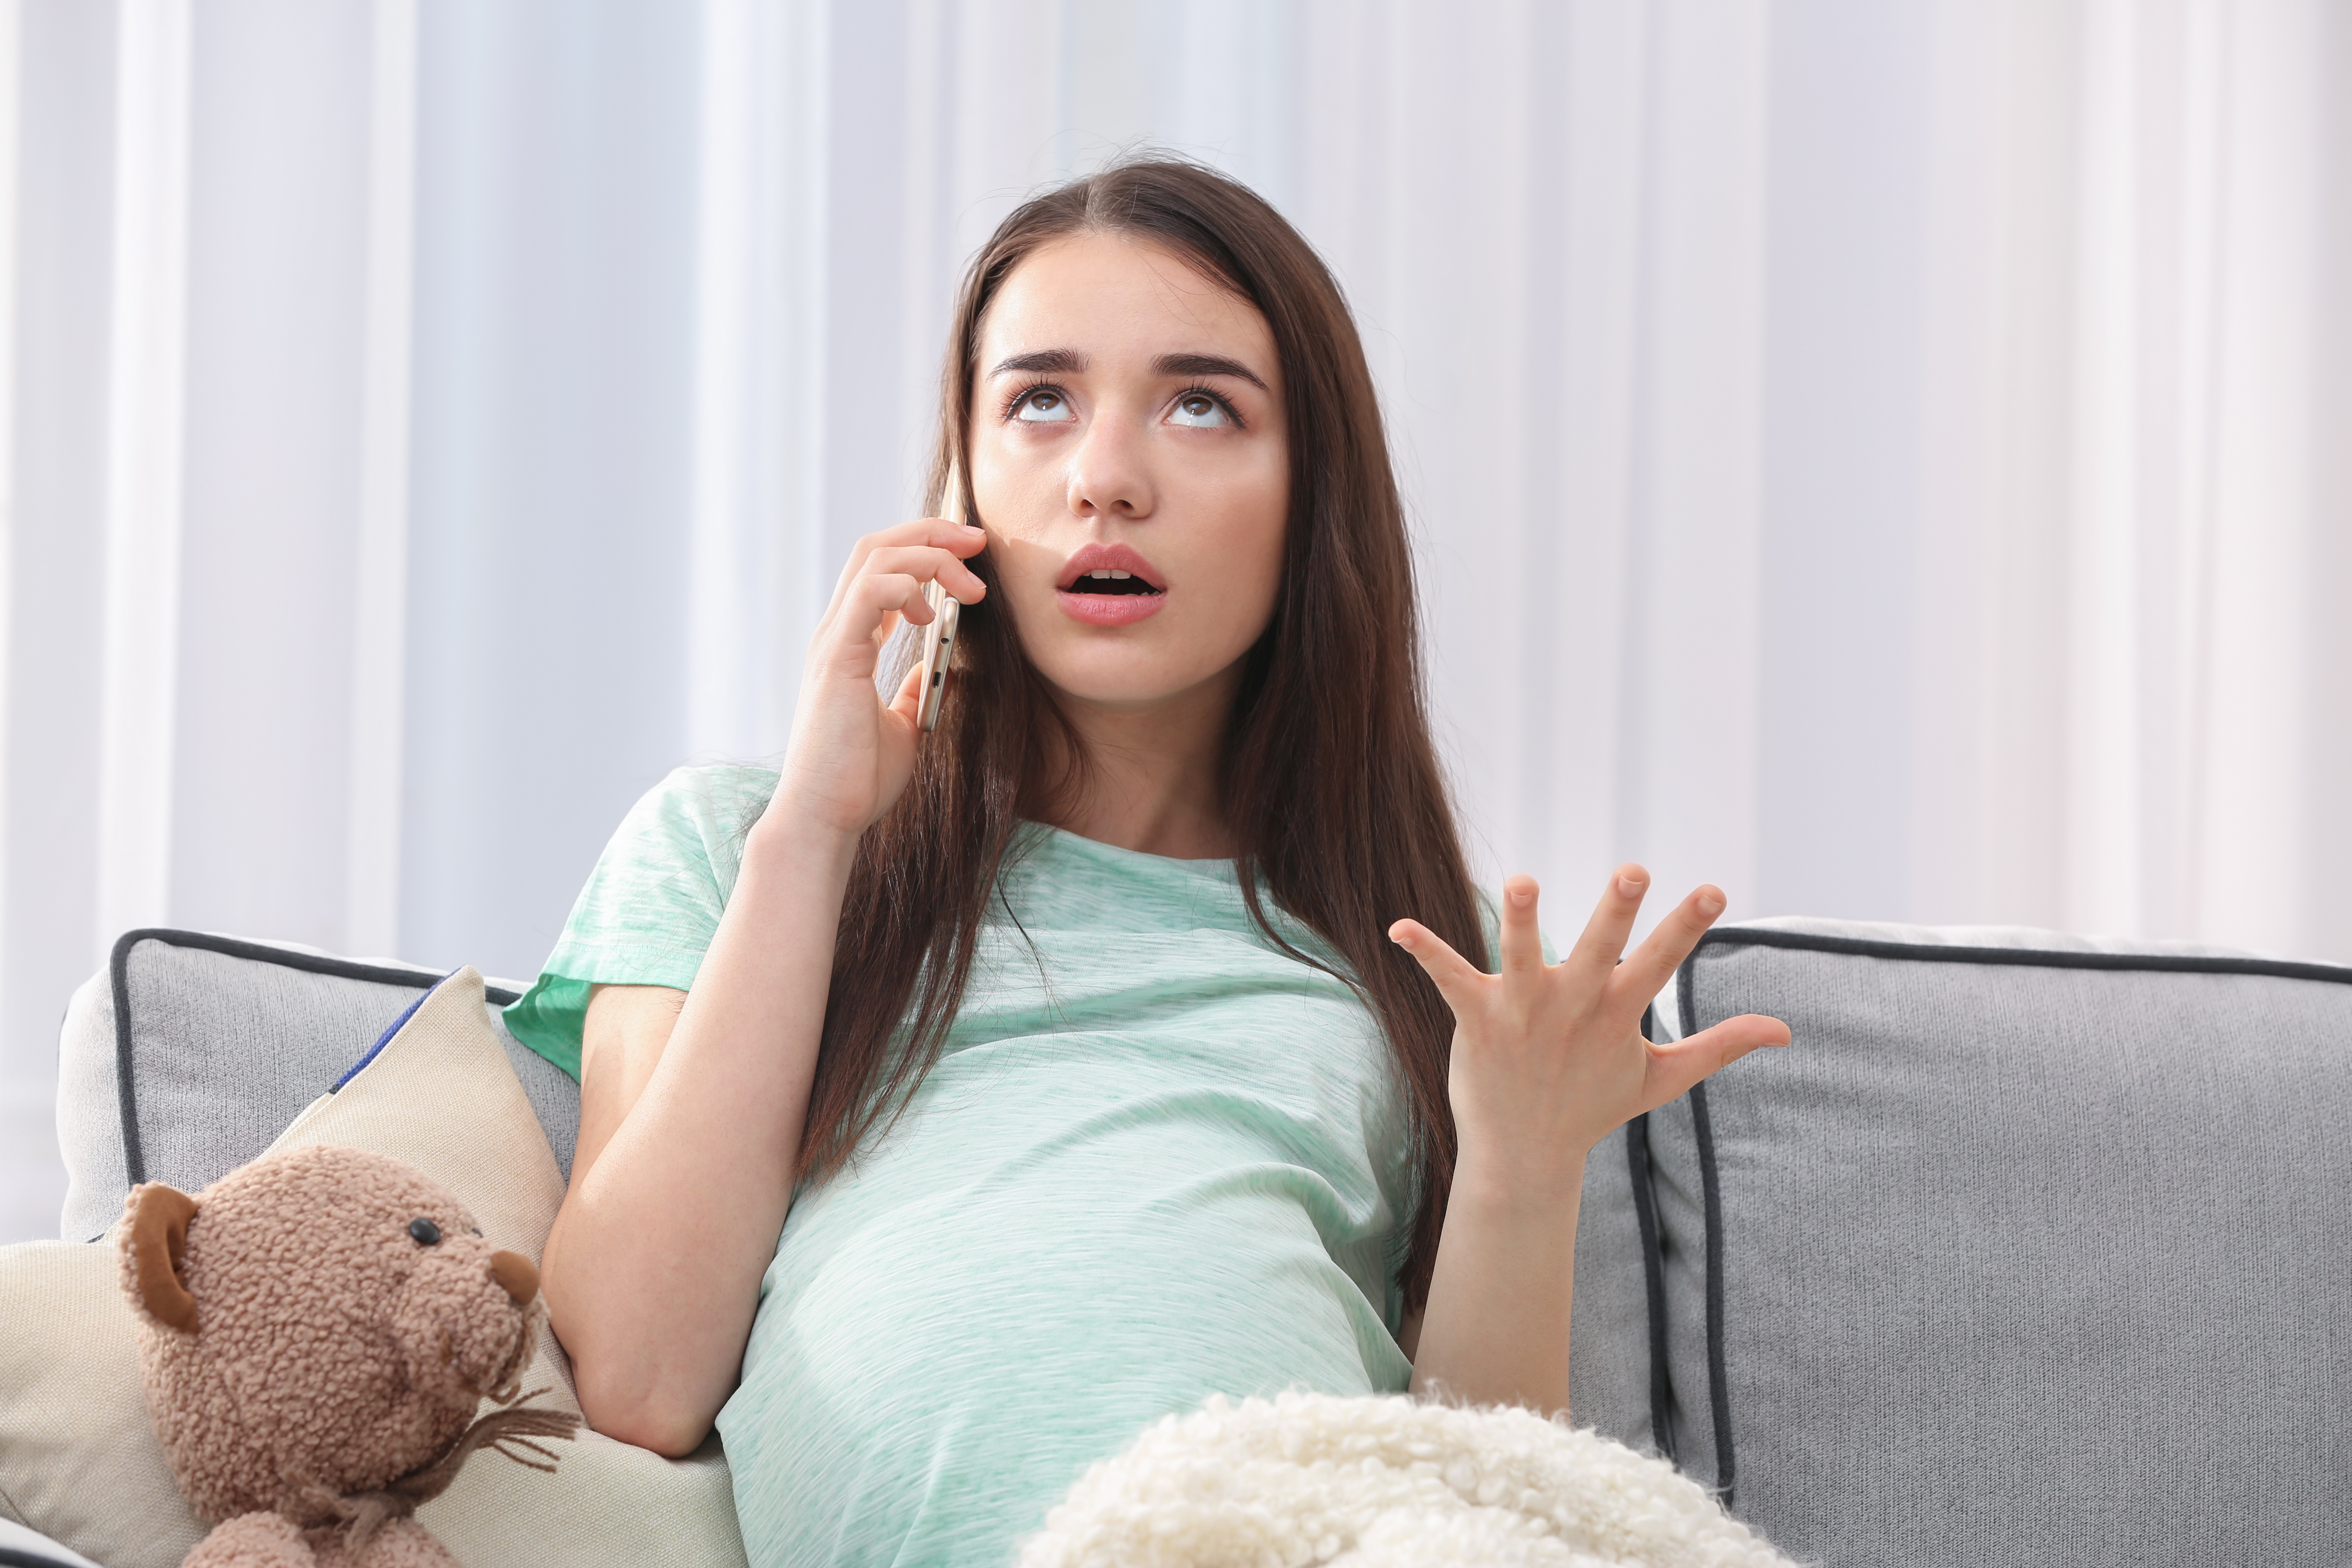 A pregnant woman looking annoyed while on the phone | Source: Shutterstock